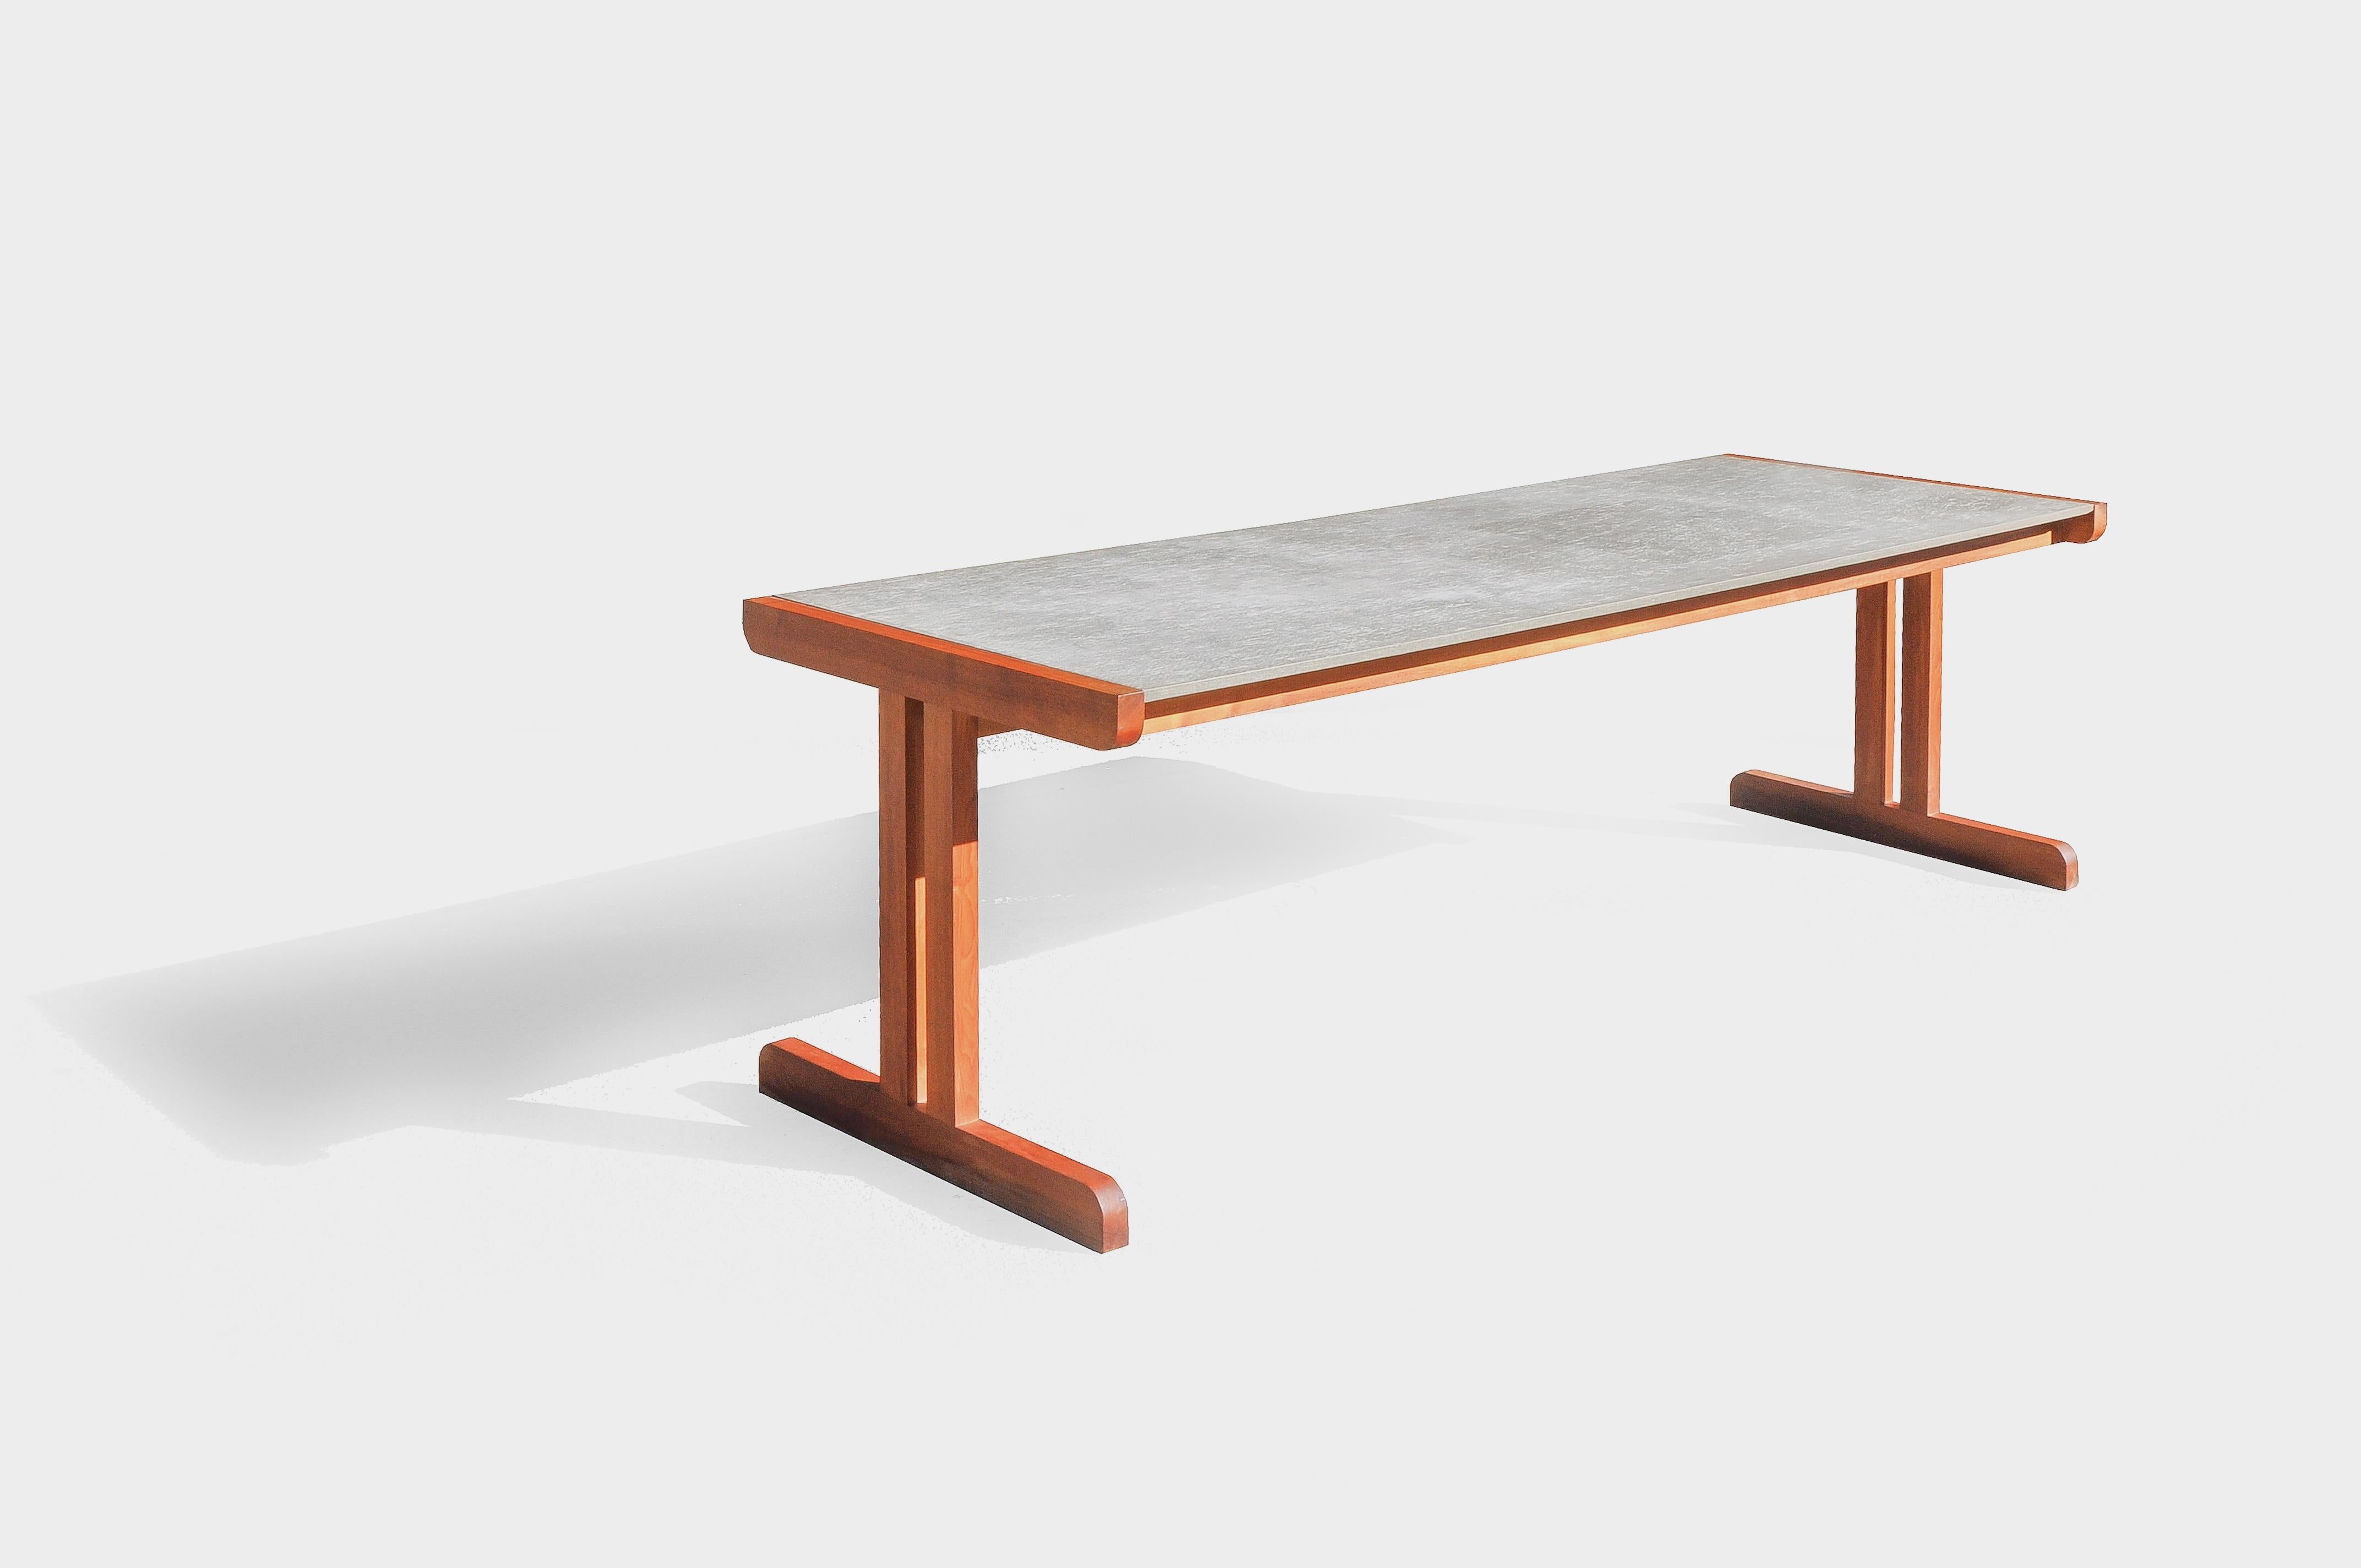 Mid-Century Modern Dining Table Prototype by Benedikt Rohner Made of Walnut and Fibre Cement, 1955 For Sale